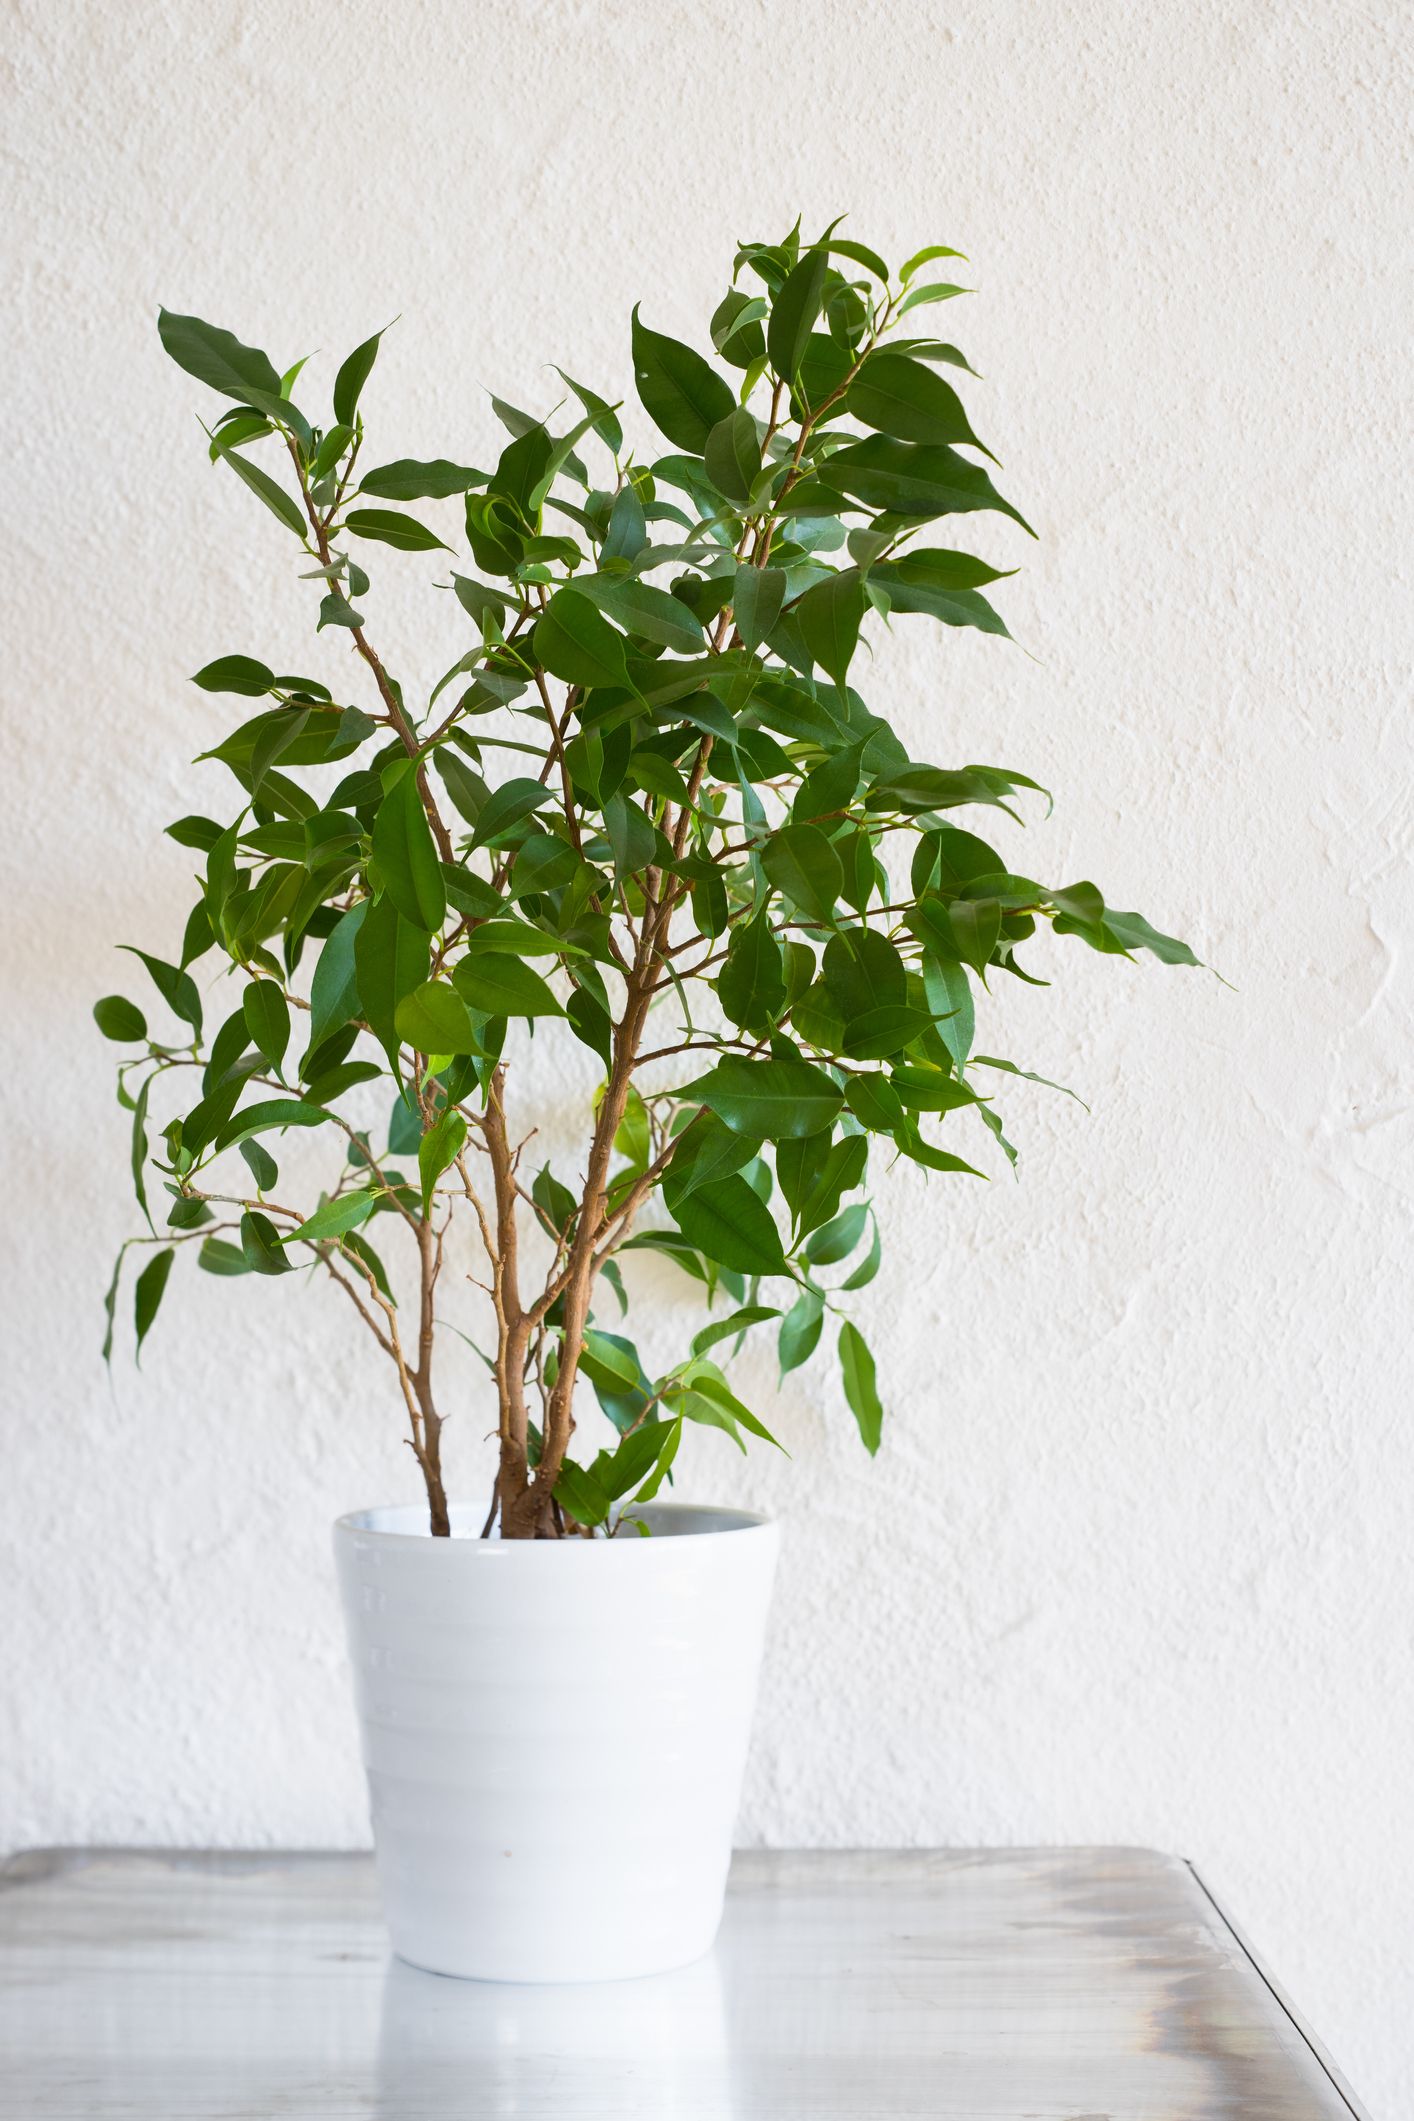 15 Oversized House Plants - Best Tall Plants to Online